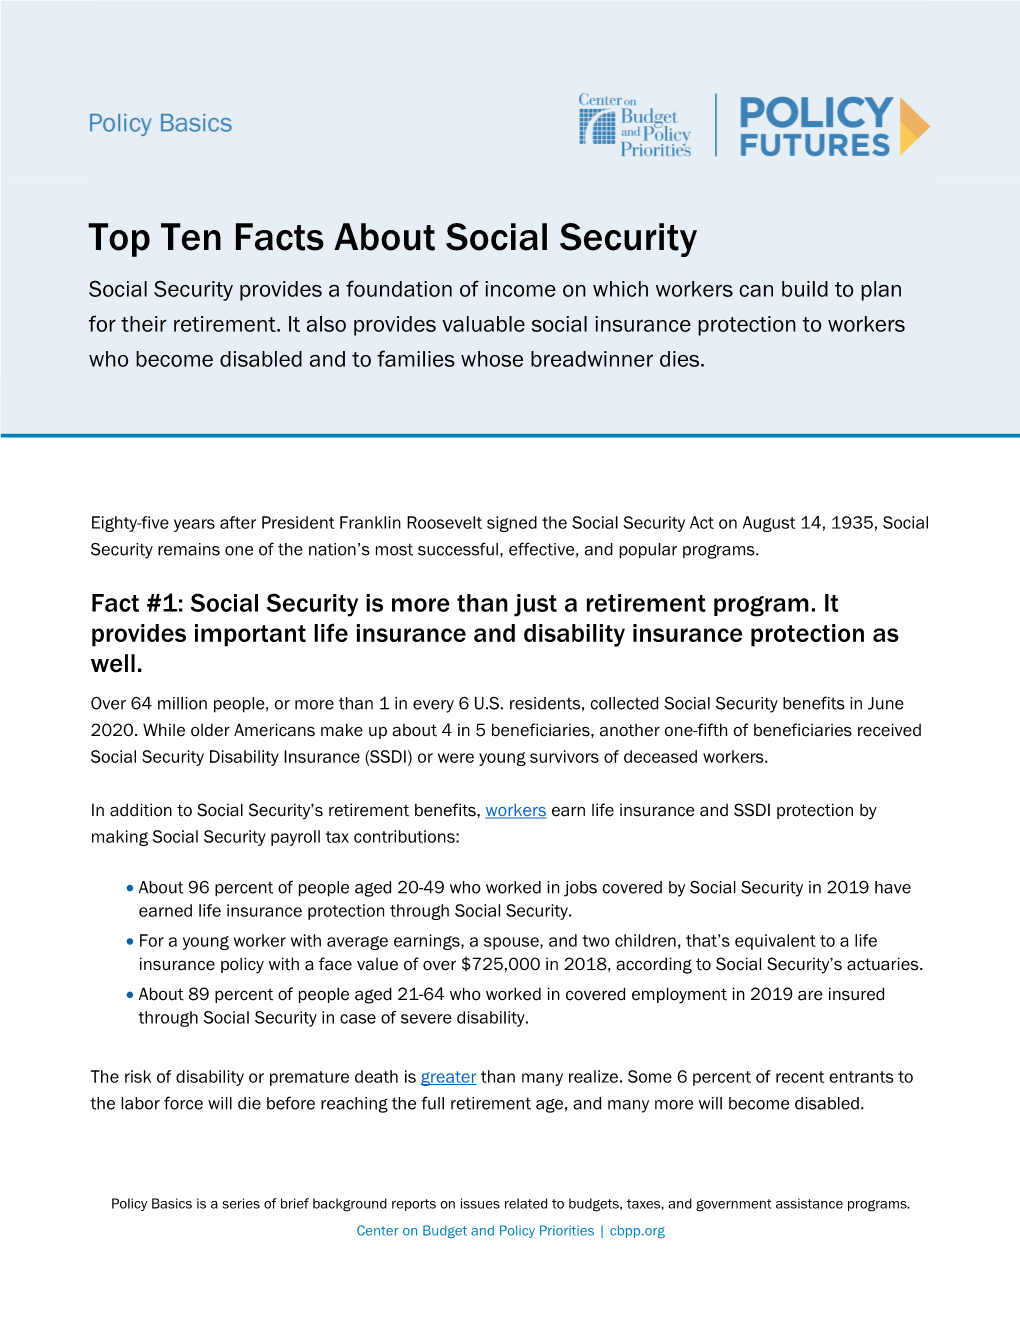 Top Ten Facts About Social Security Social Security Provides a Foundation of Income on Which Workers Can Build to Plan for Their Retirement